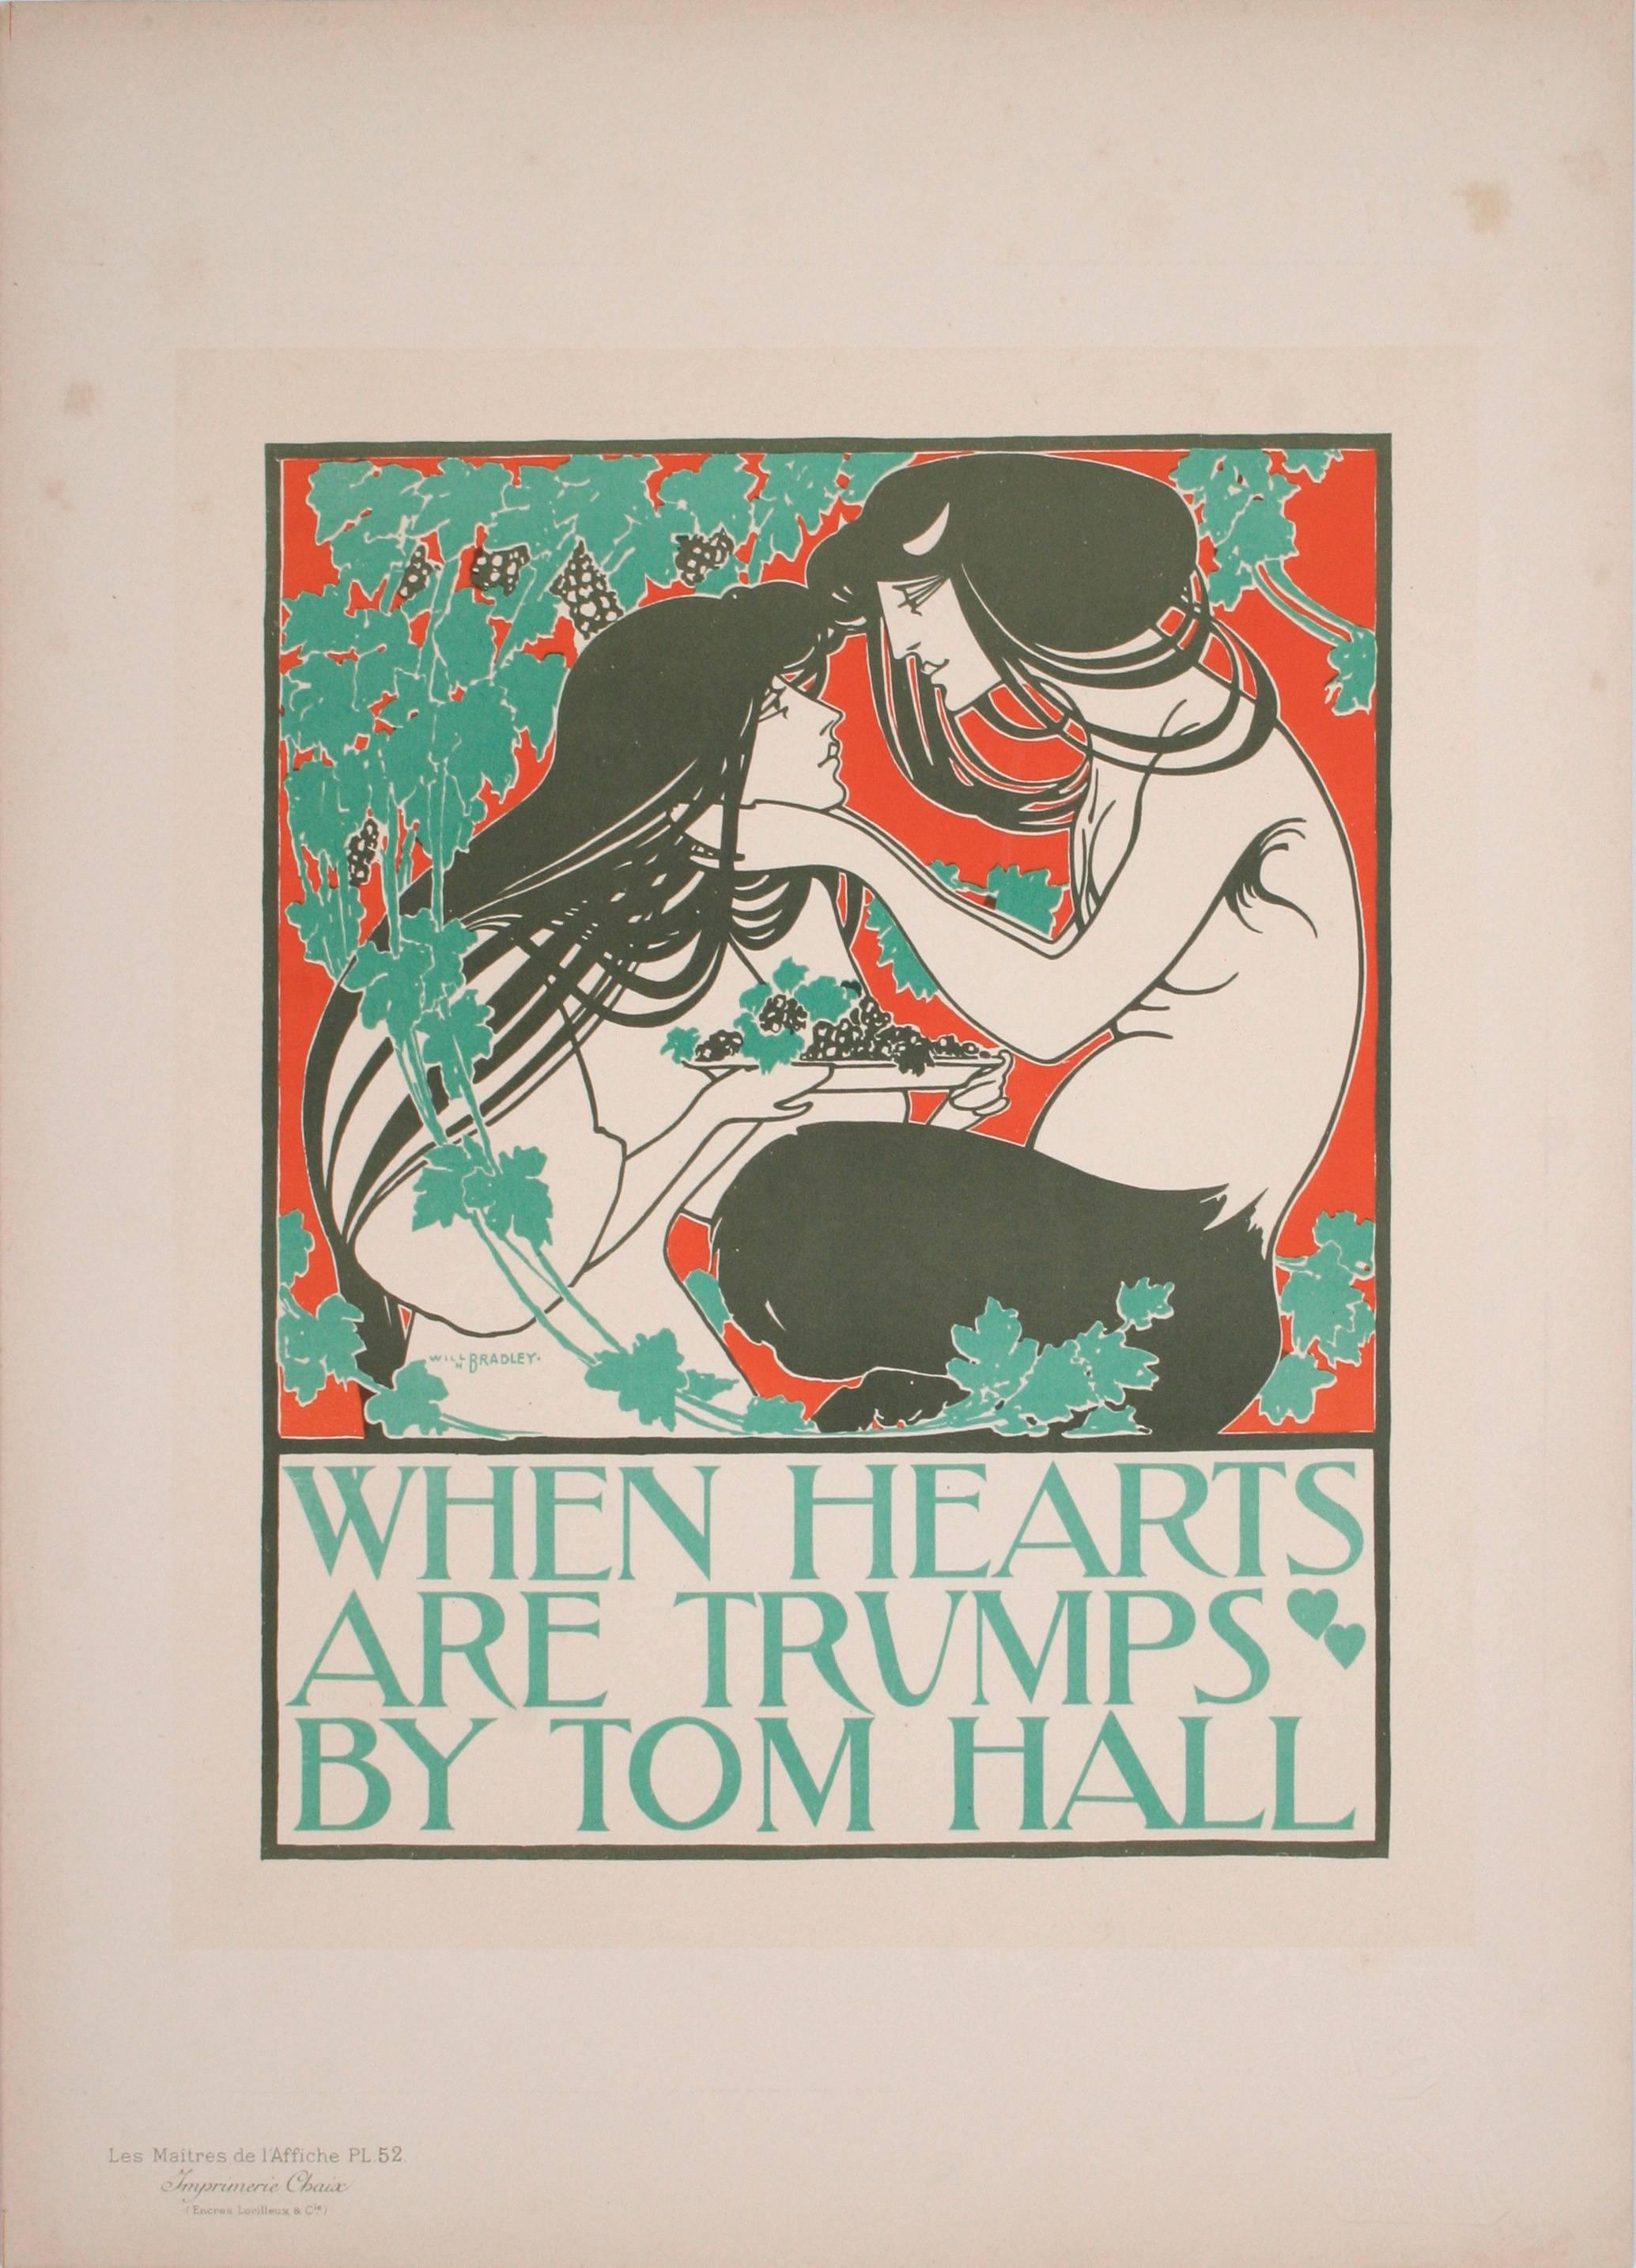 "When Hearts are Trump, " by Will Bradley from "The Masters of the Poster, " 1896 - Print by William Bradley